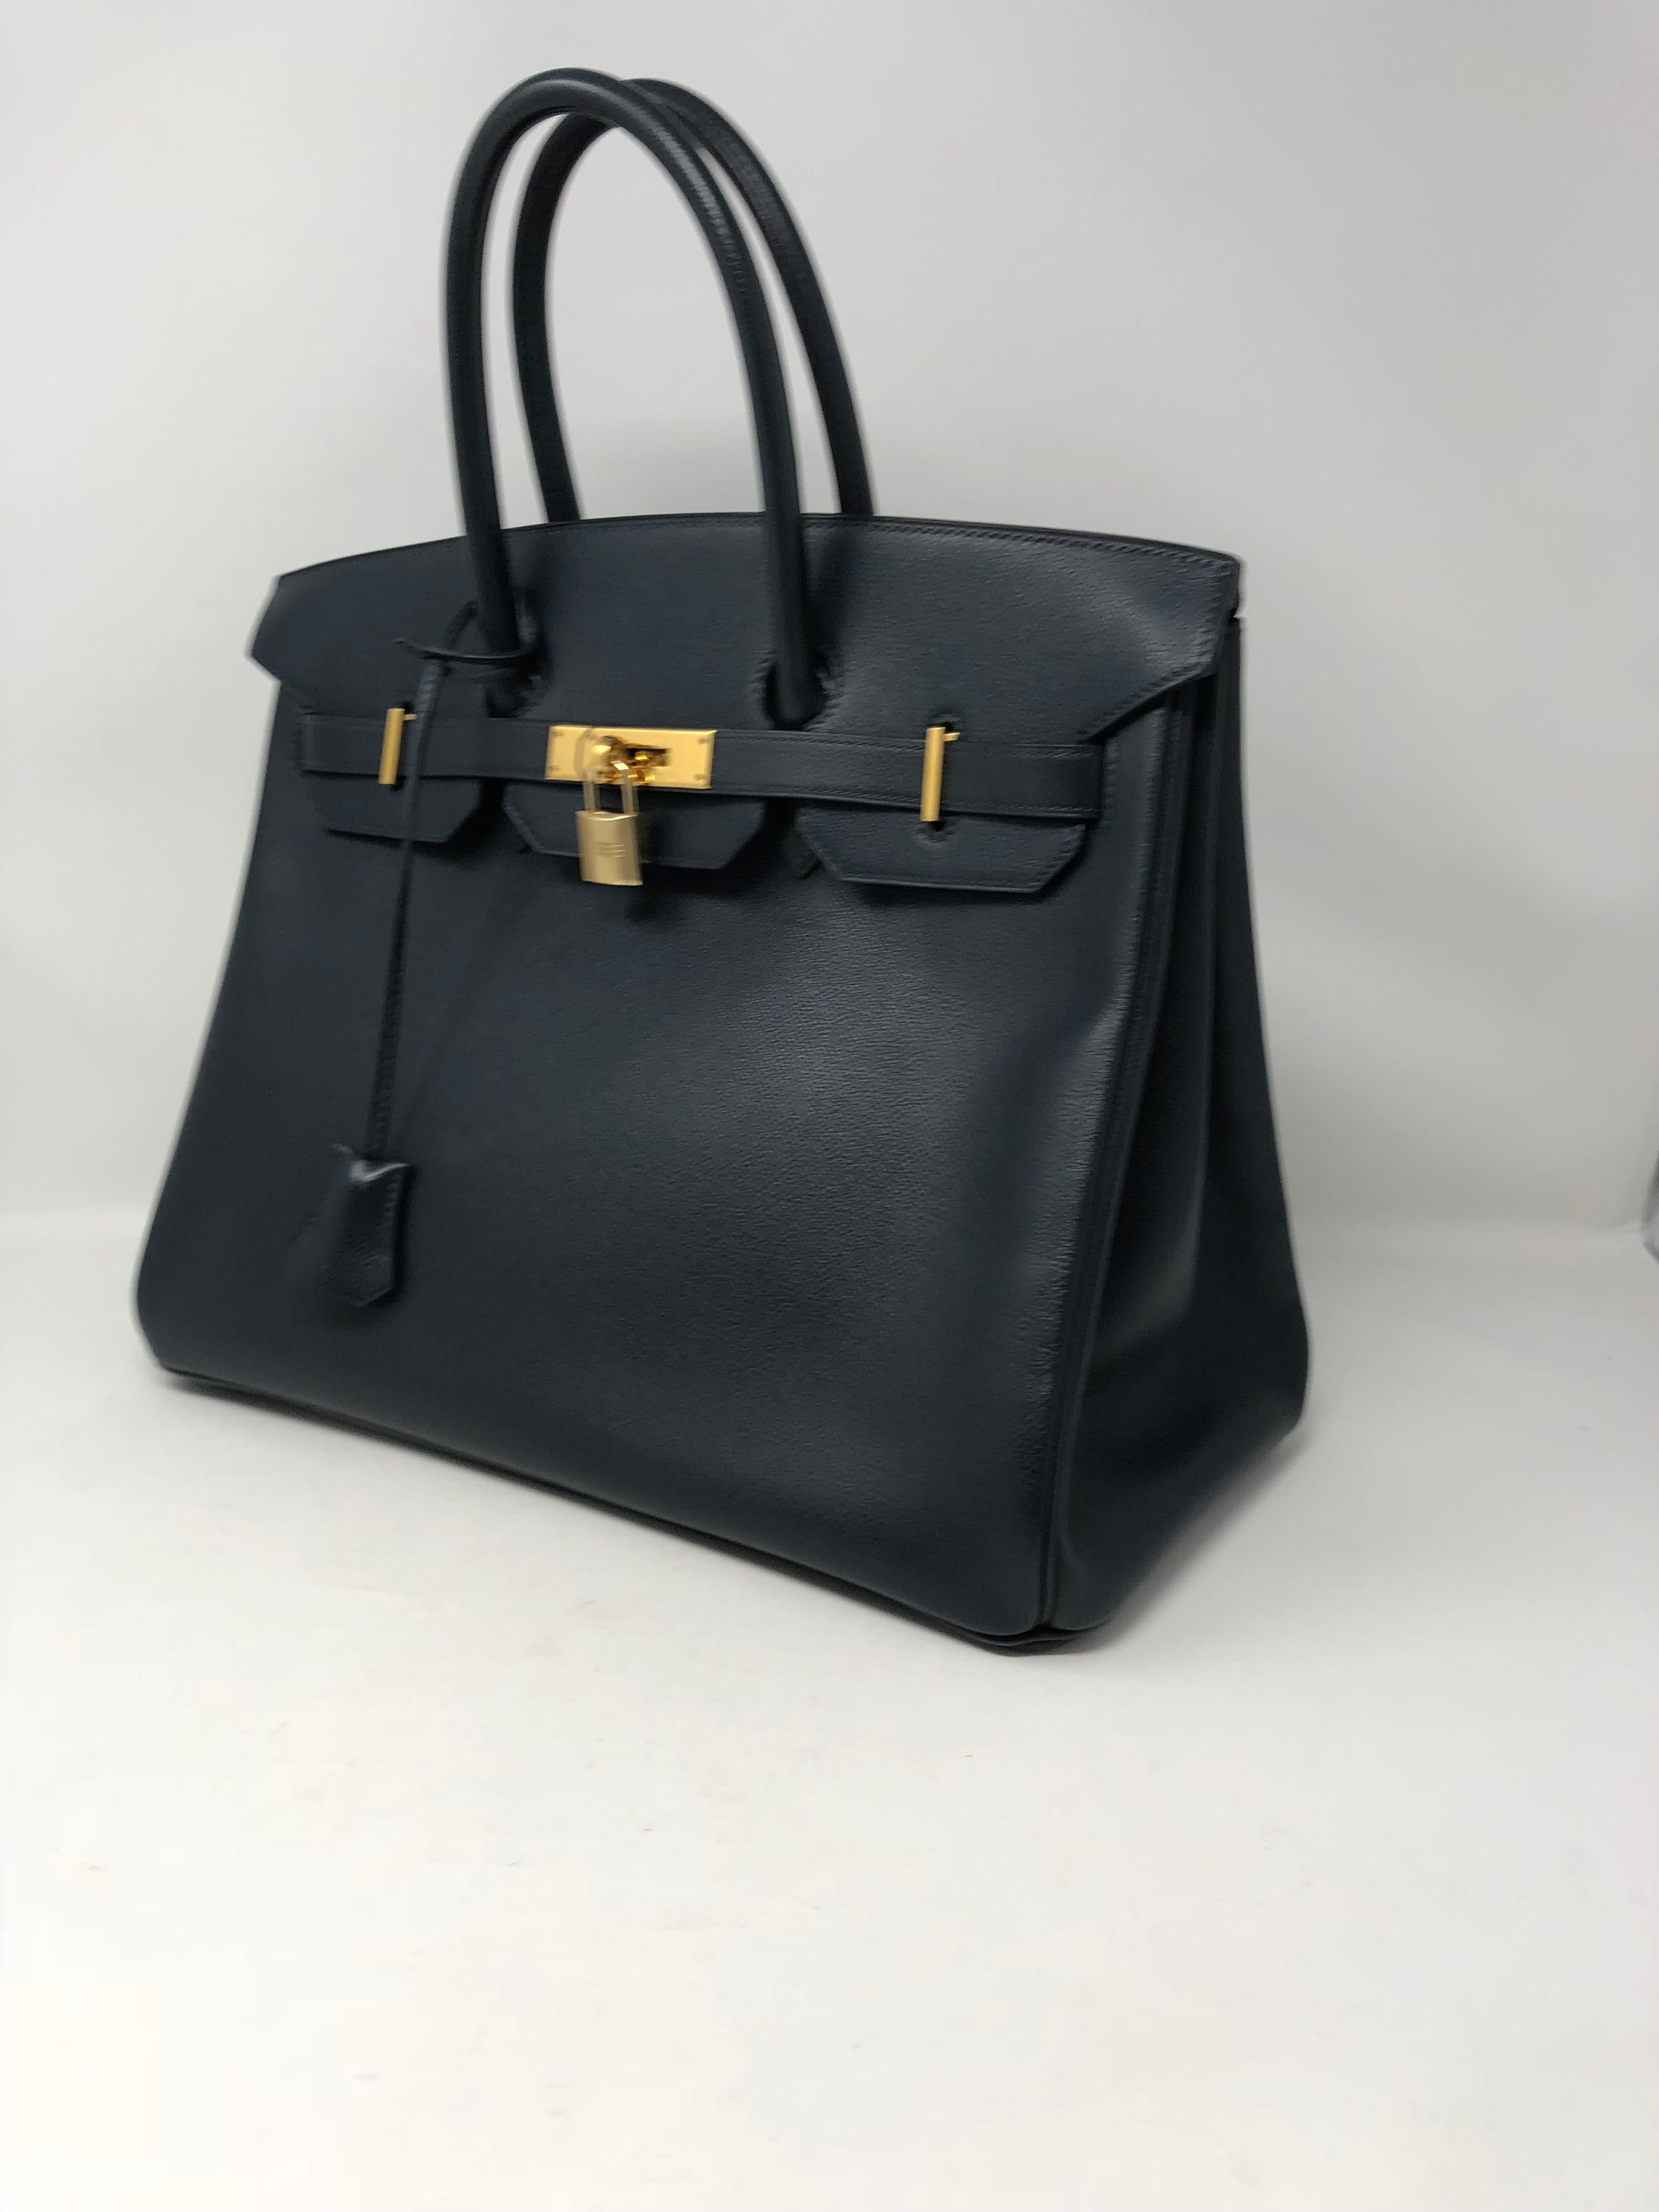 Hermes Navy Birkin 35 in courchevel leather. Gold hardware. Excellent condition. No slouch to the bag and stands up straight. Interior is mint as well. 